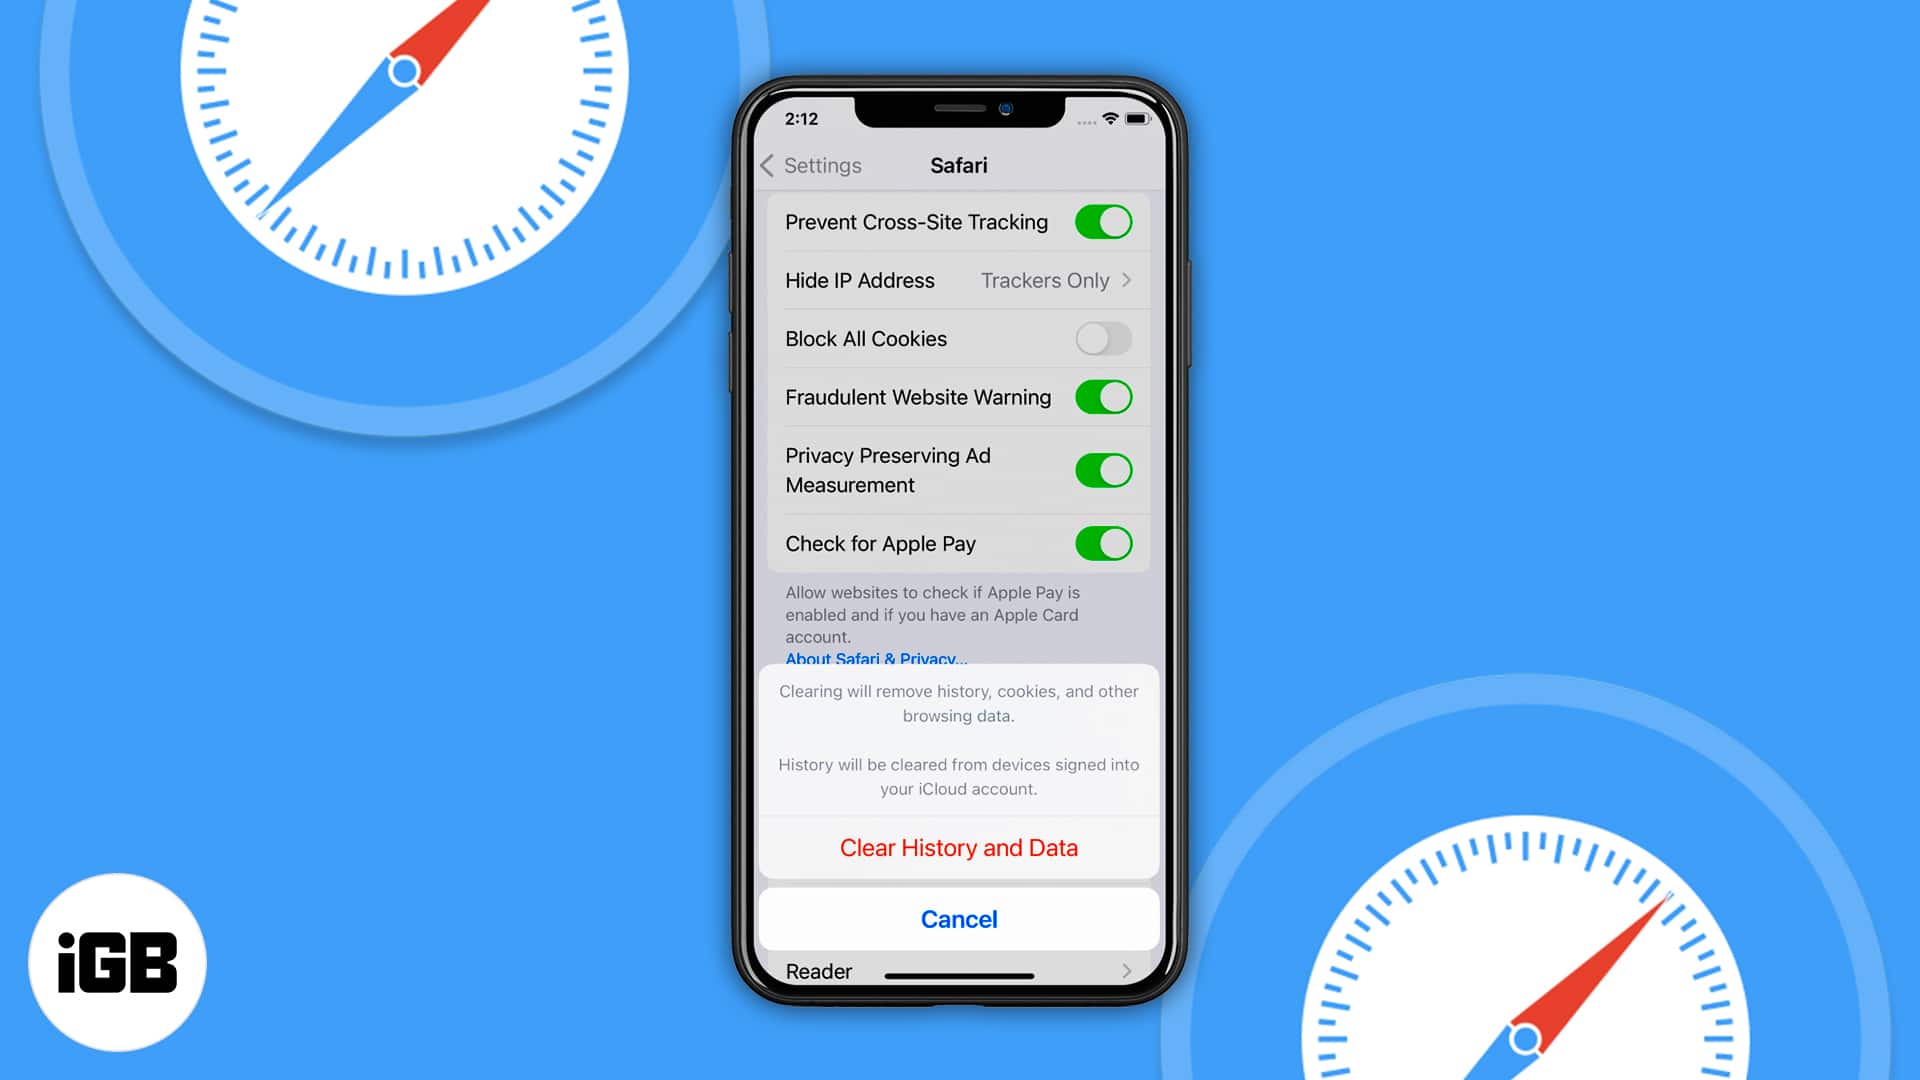 Step 5: A pop-up message will appear, asking you to confirm if you want to clear history and website data. Tap on Clear History and Data.
Step 6: Wait for a few seconds until your iPhone clears all the data and cache stored in Safari.